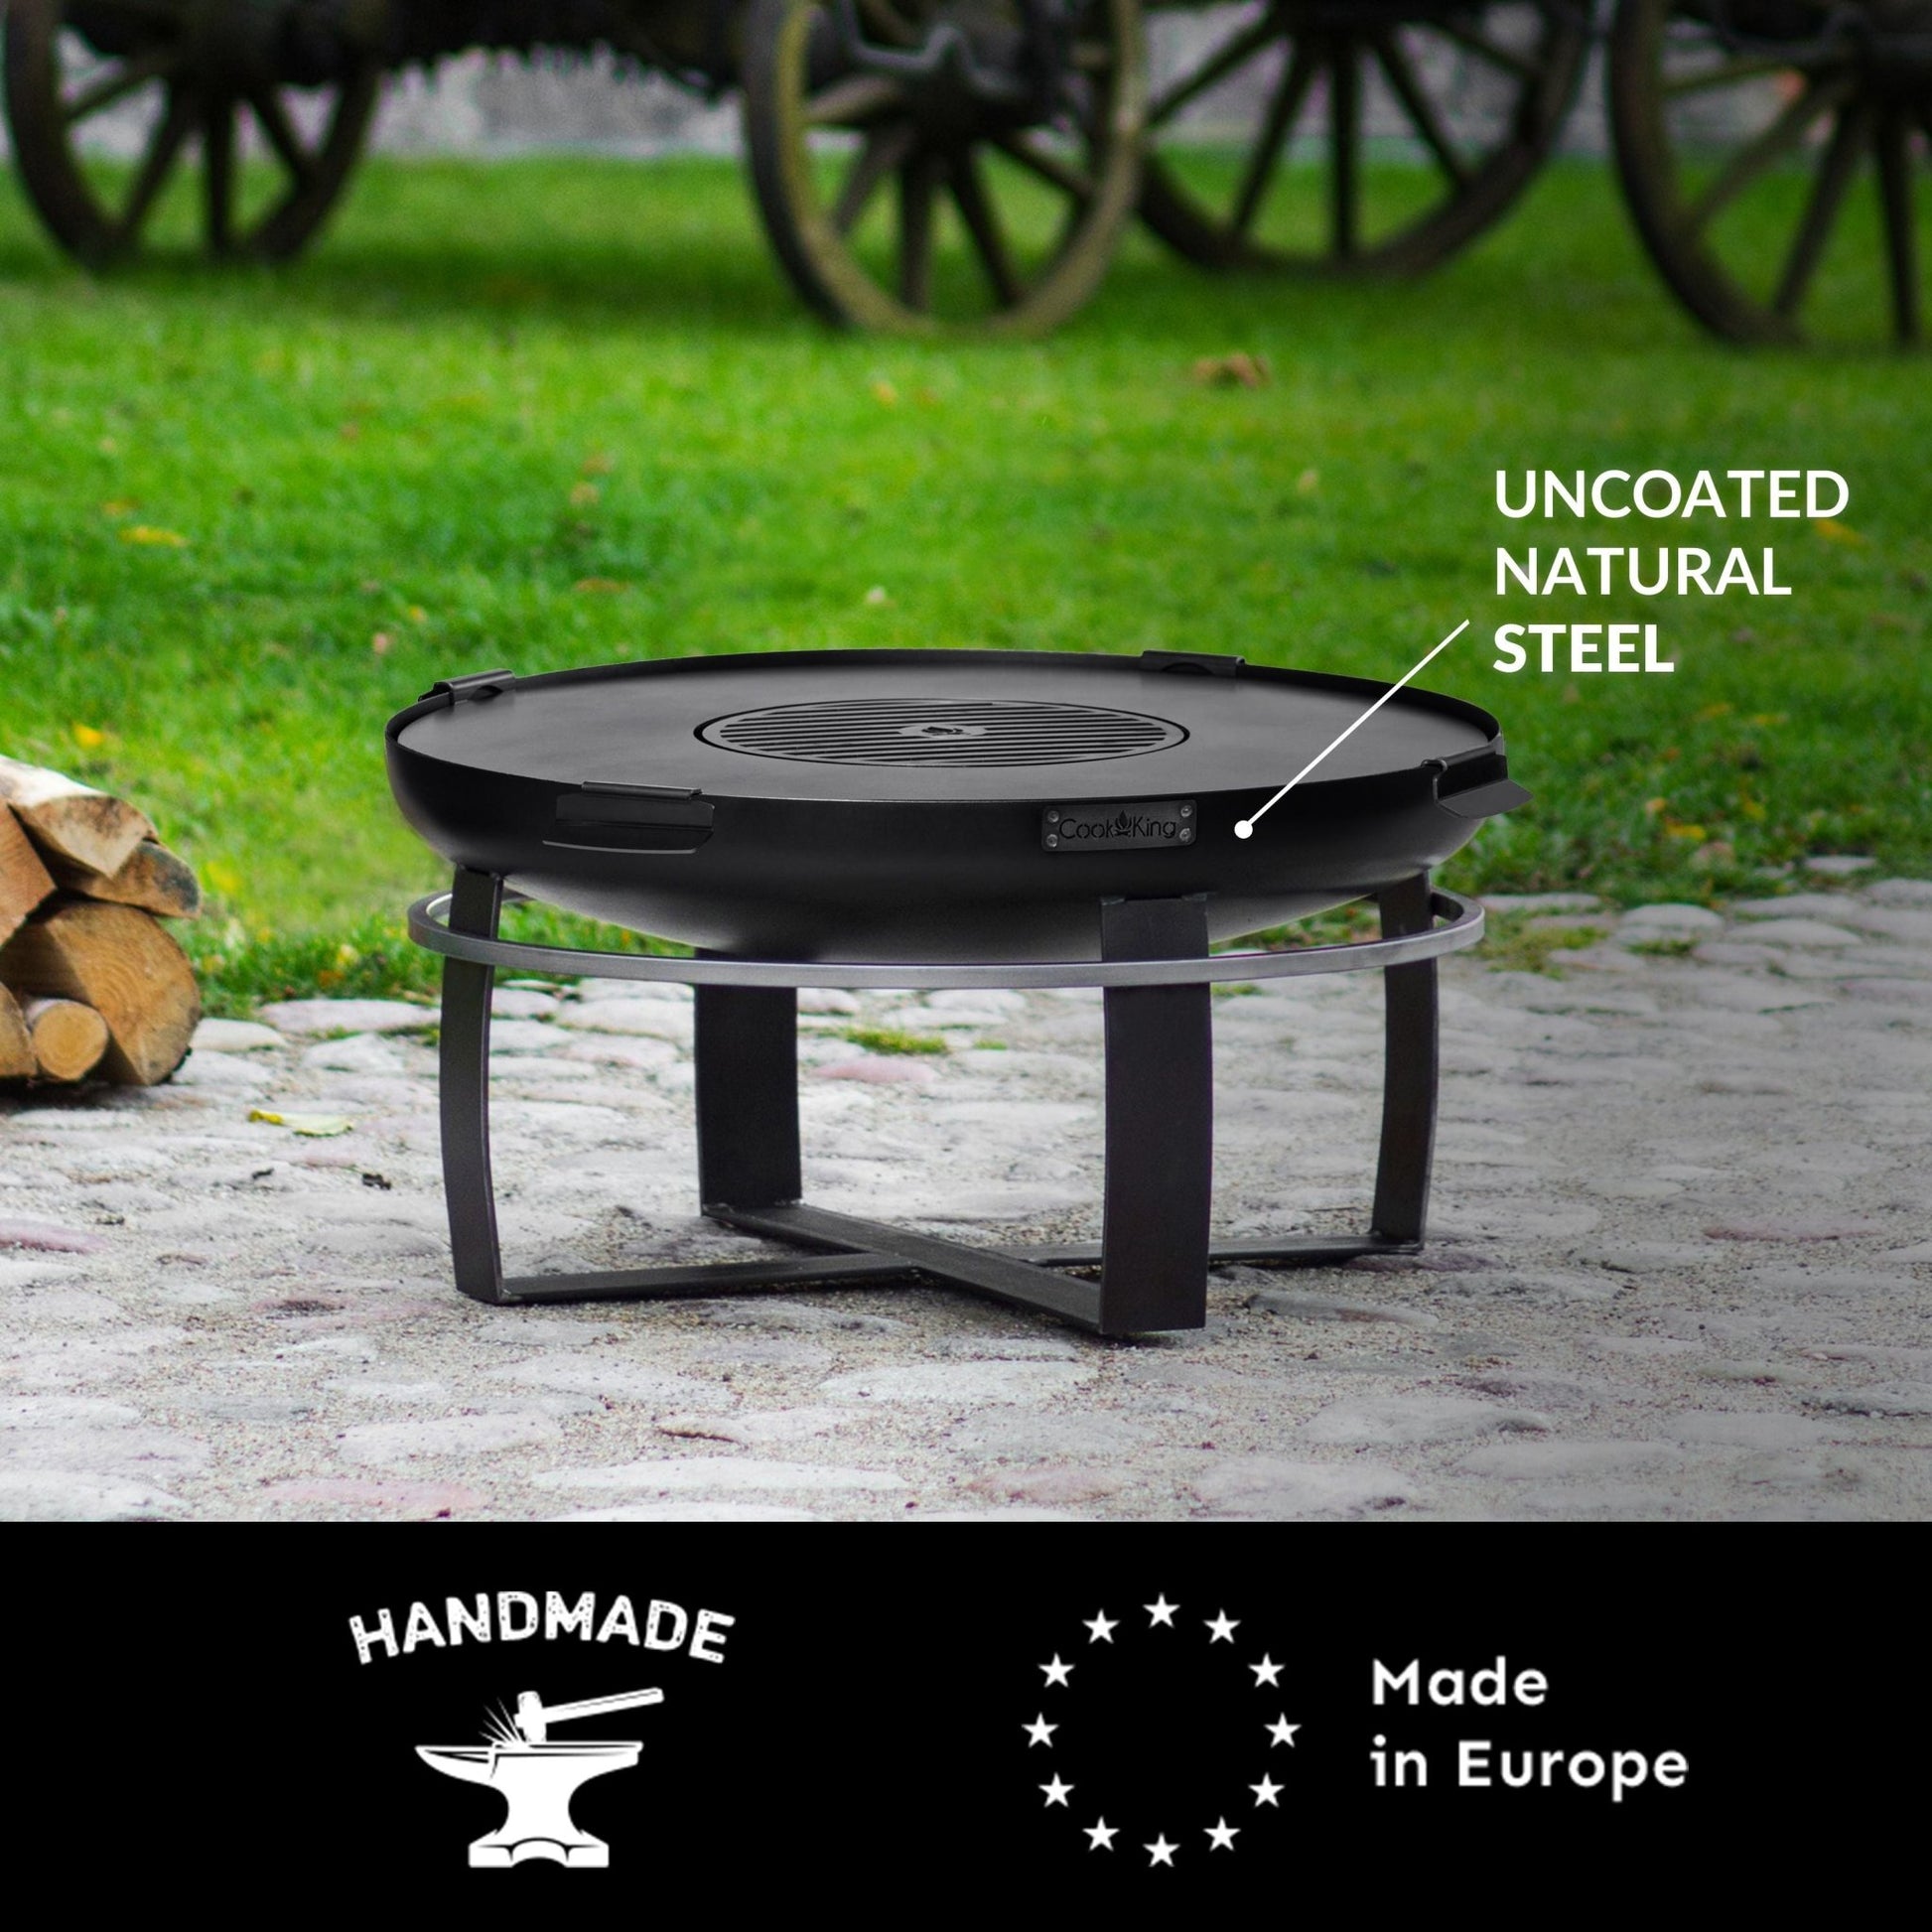 Ignition 32" Fire Pit with Grill Plate - Good Directions